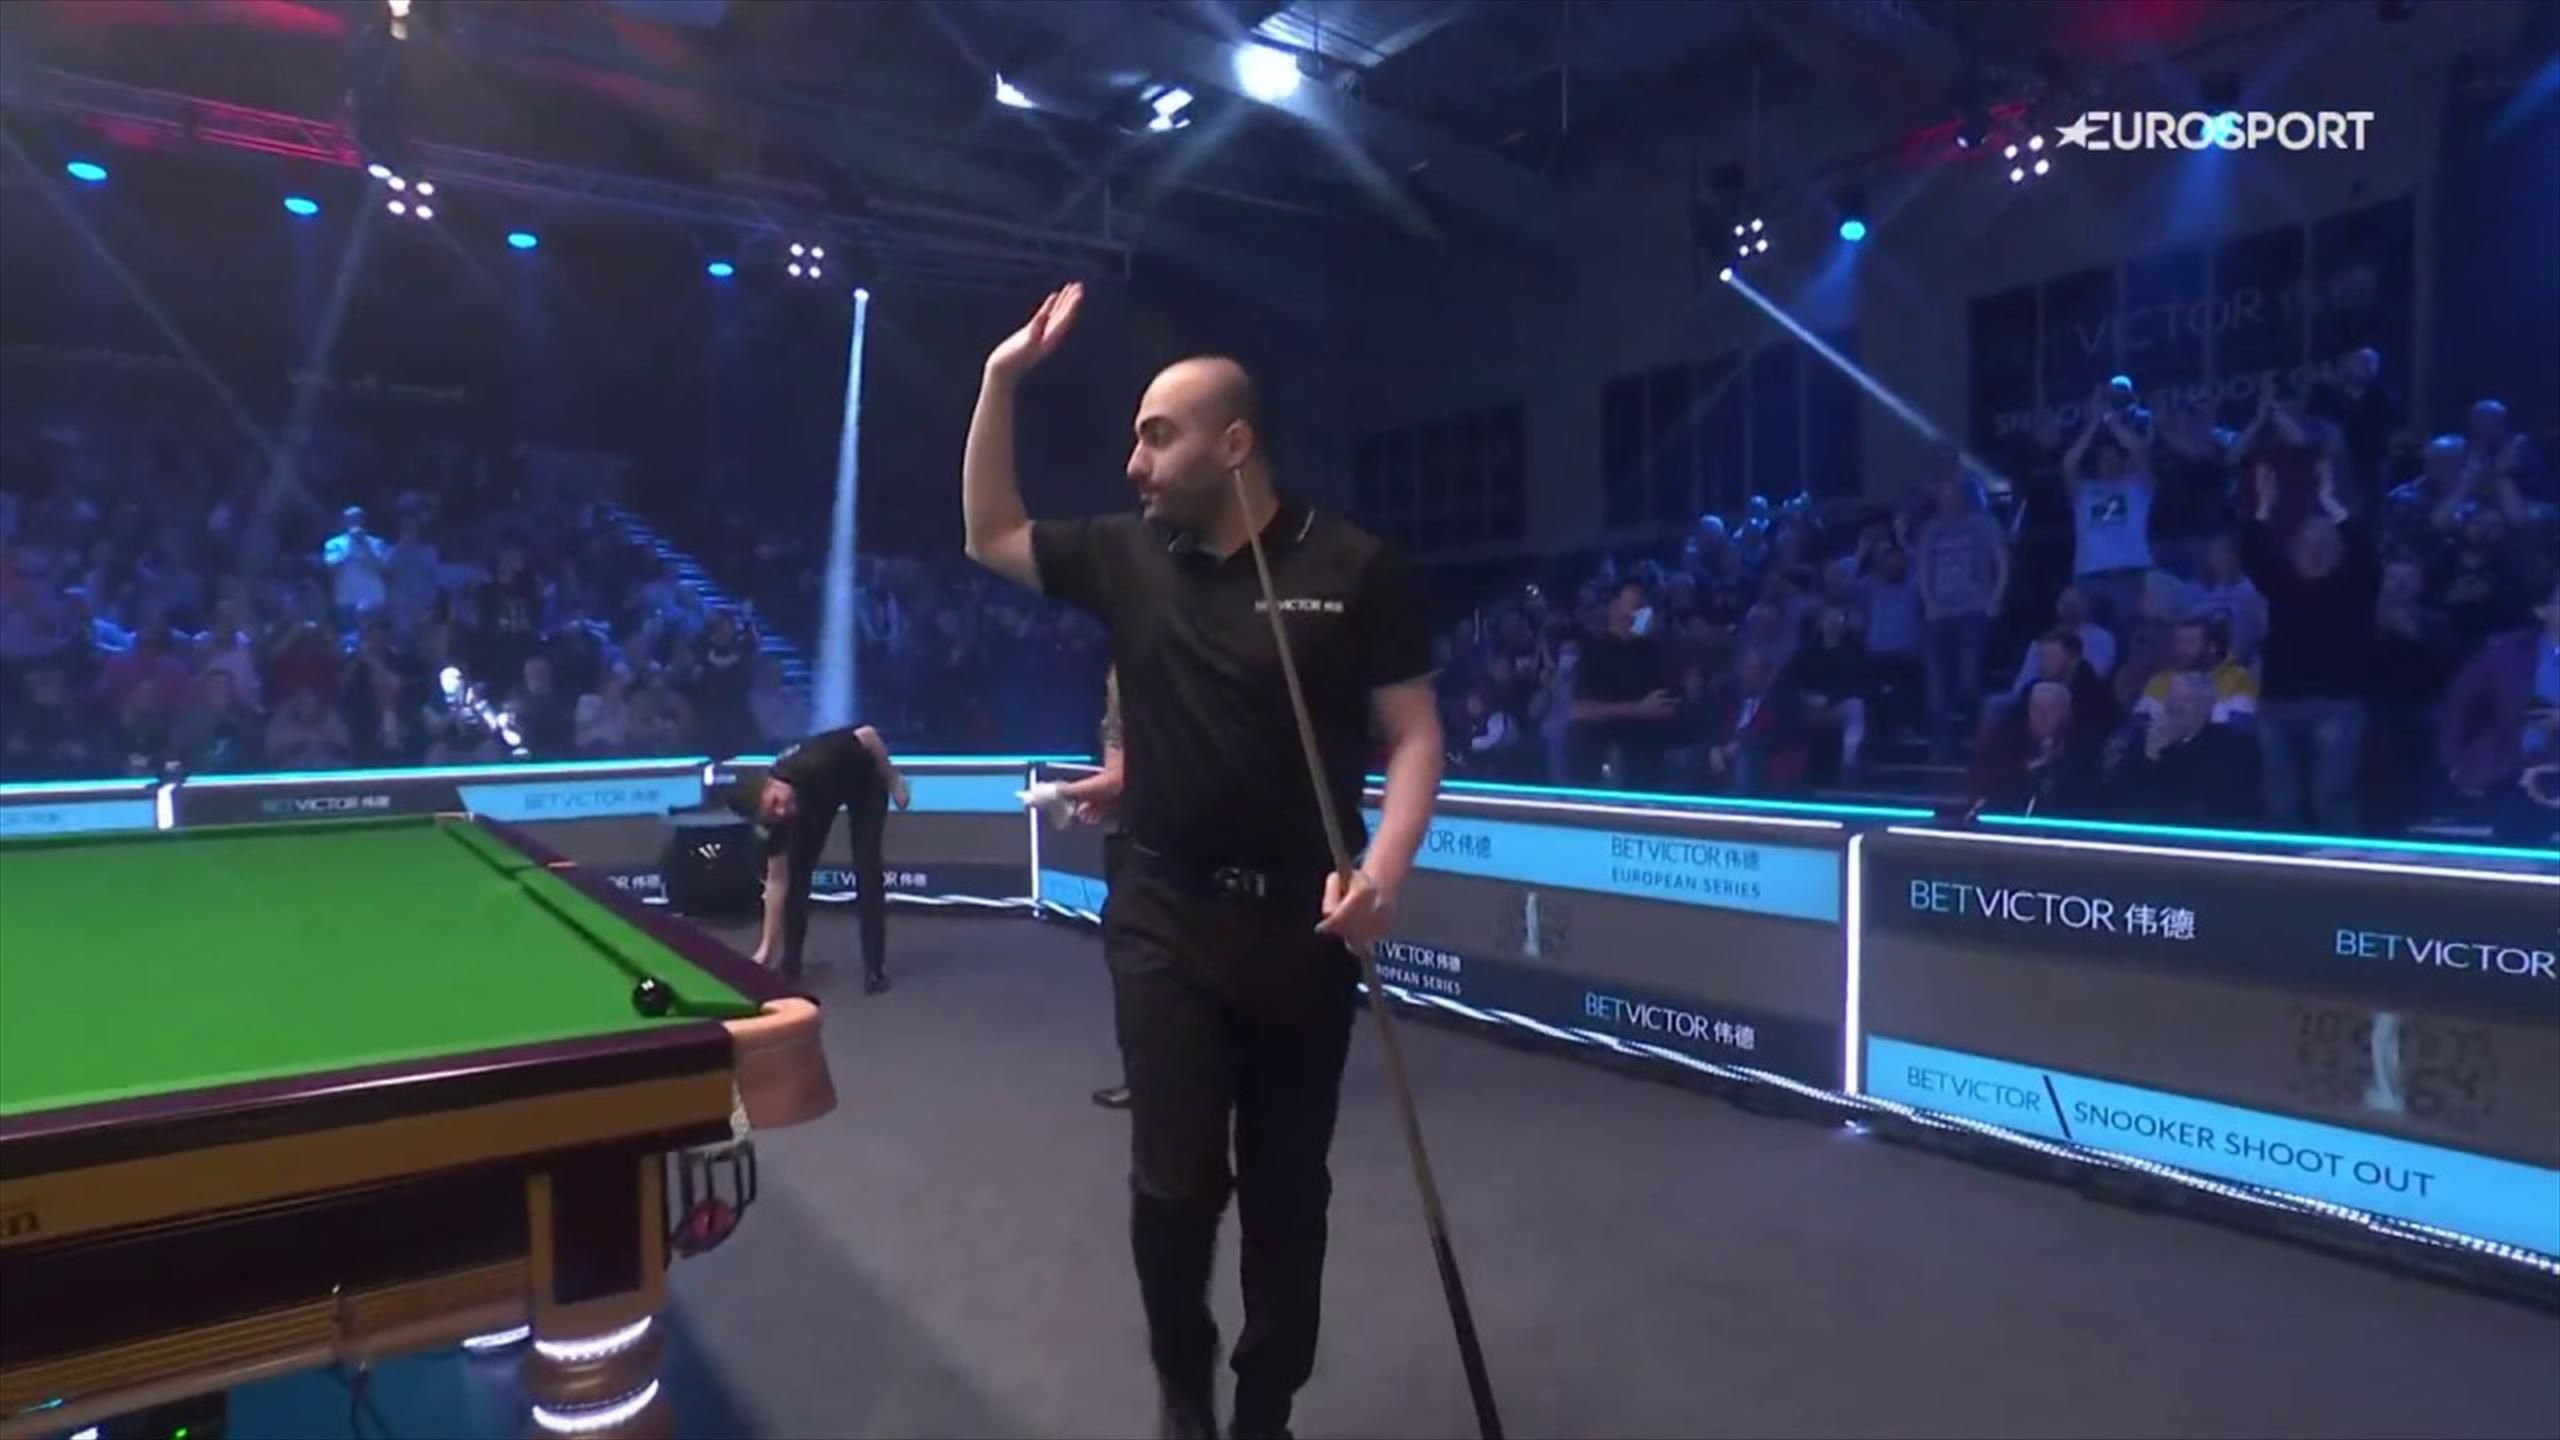 Stand by for the roar - Hossein Vafaei thrills Snooker Shoot Out crowd with century break against Peter Devlin